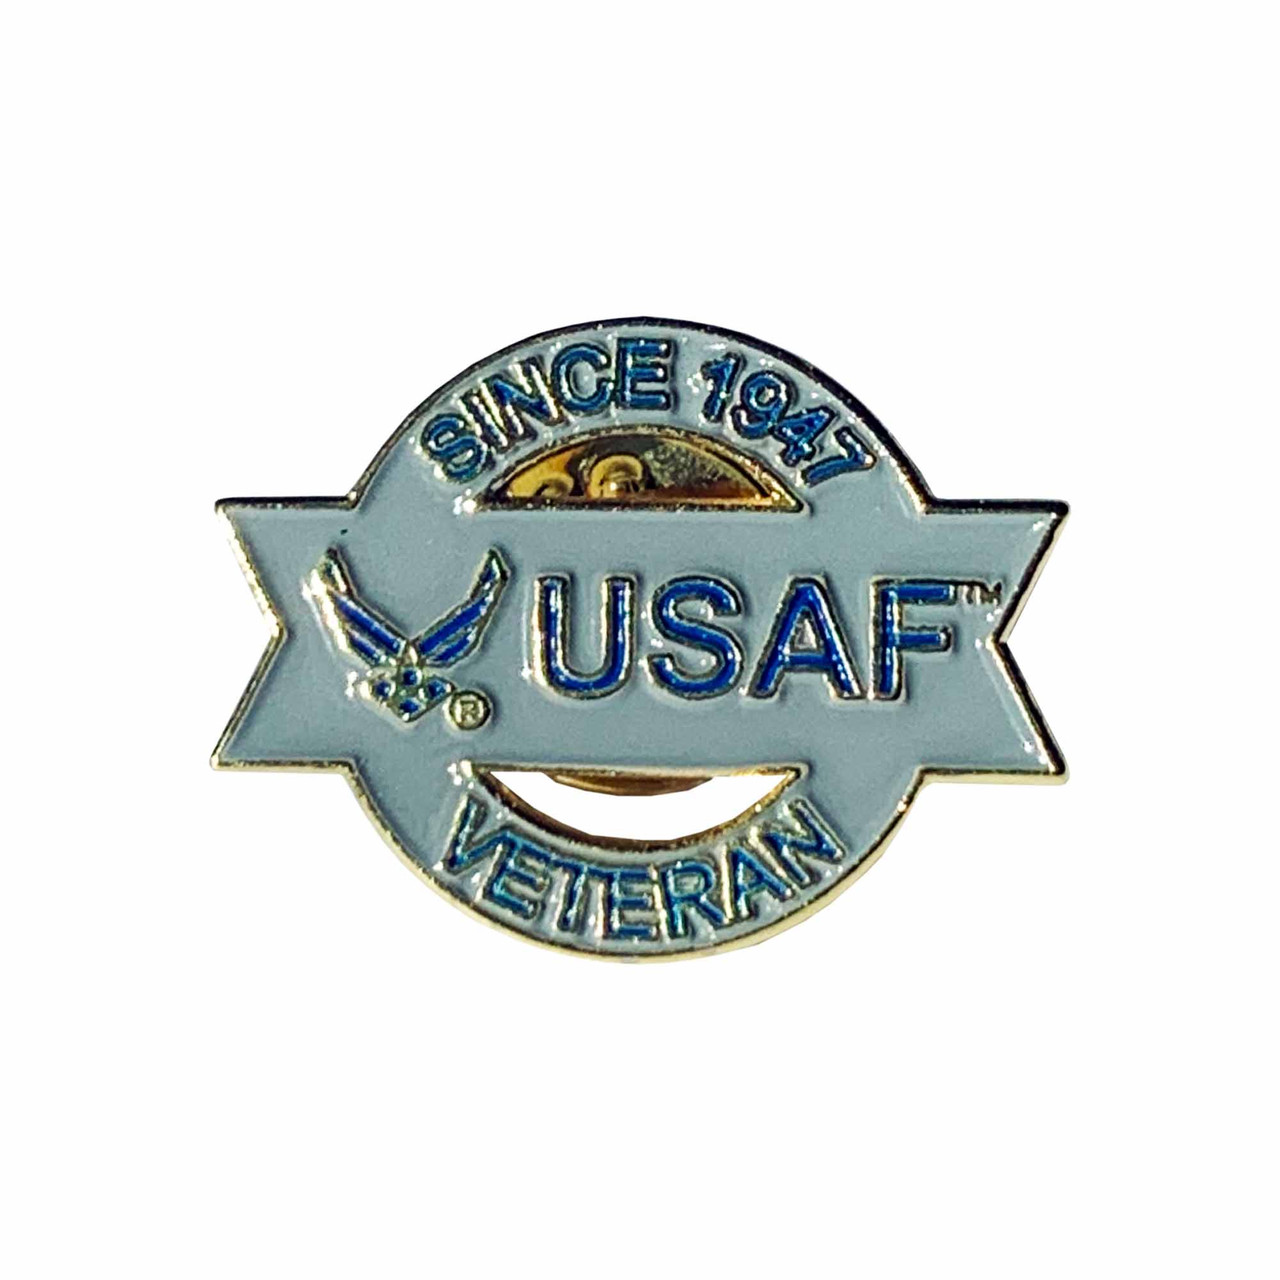 Officially Licensed United States Air Force Logo Lapel Pin with Veteran Since 1947 front view